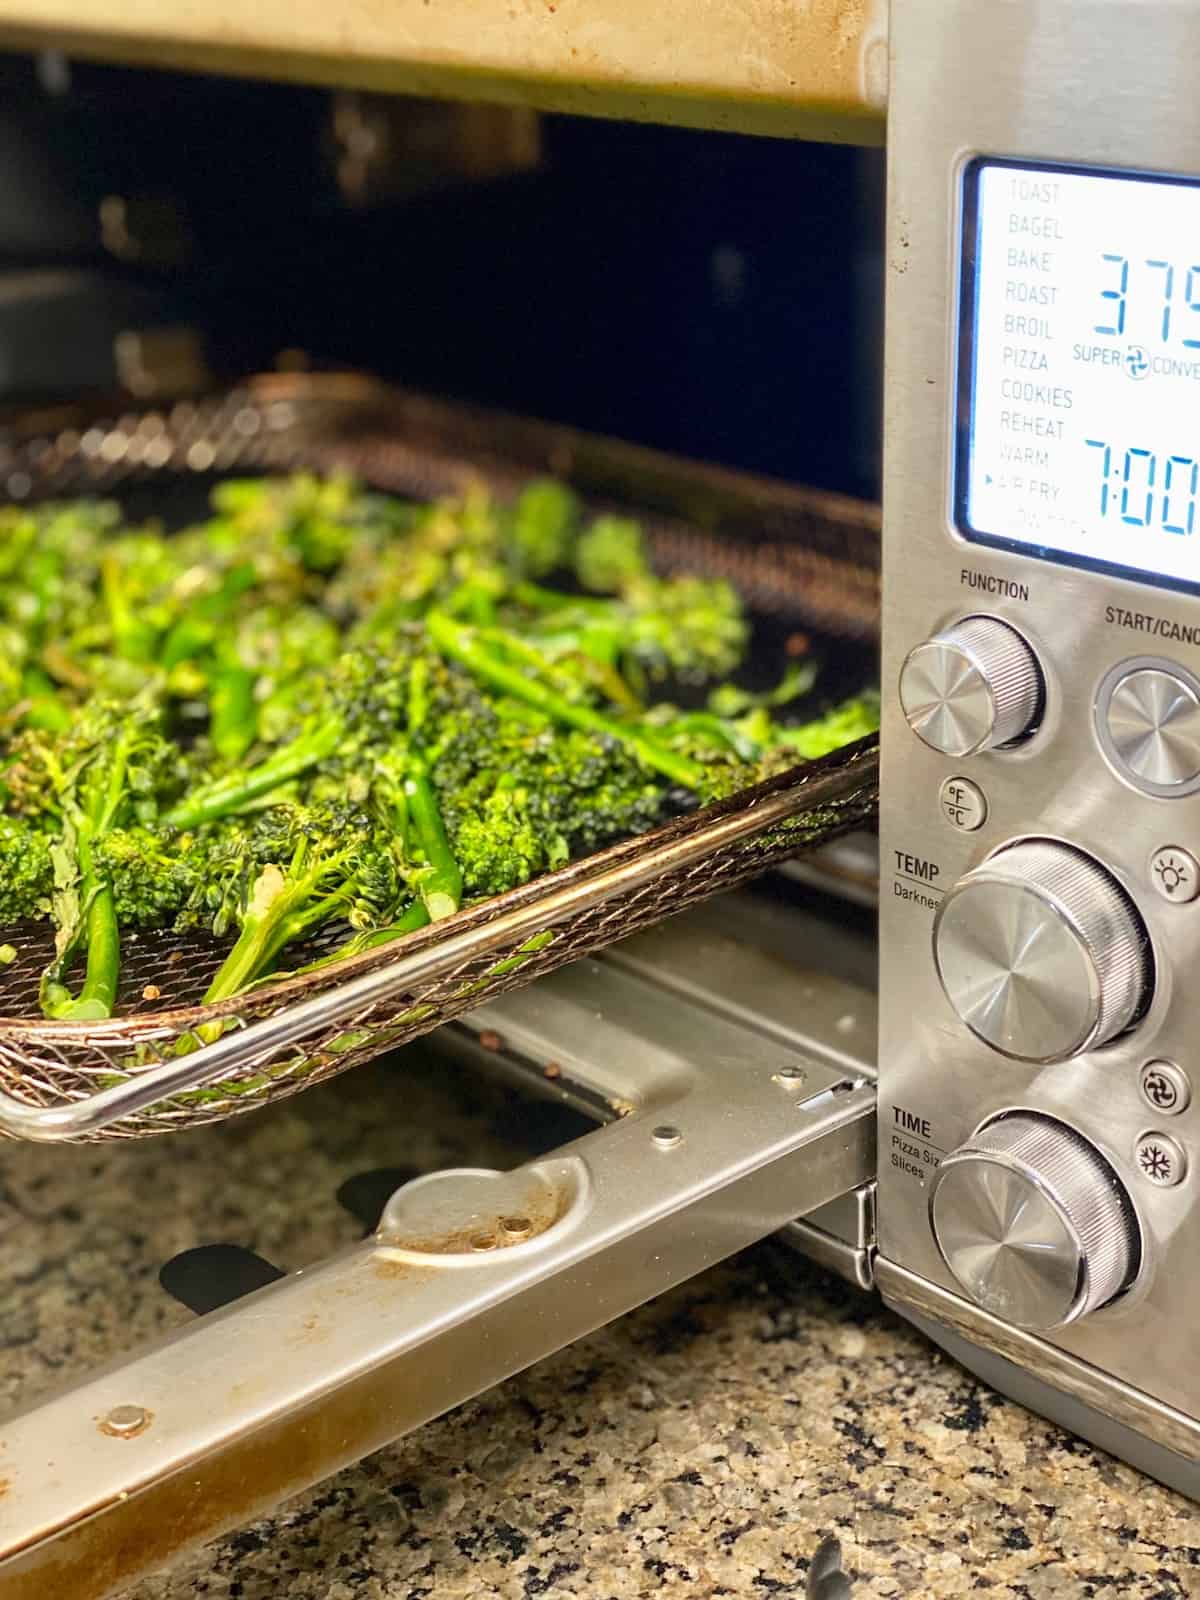 Broccoli on the air fryer tray crispy and cooked.